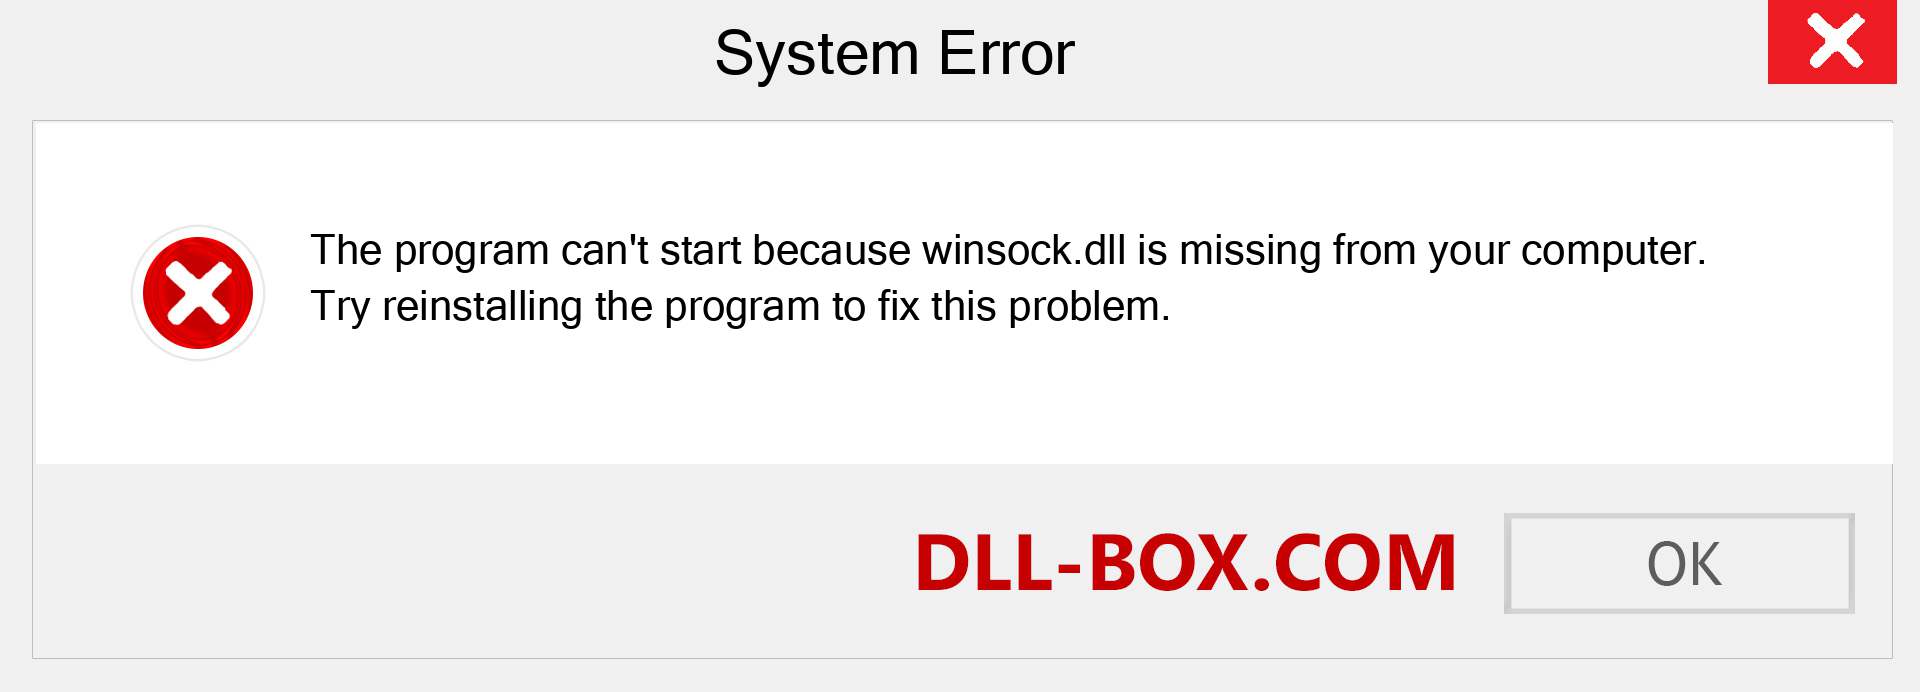  winsock.dll file is missing?. Download for Windows 7, 8, 10 - Fix  winsock dll Missing Error on Windows, photos, images